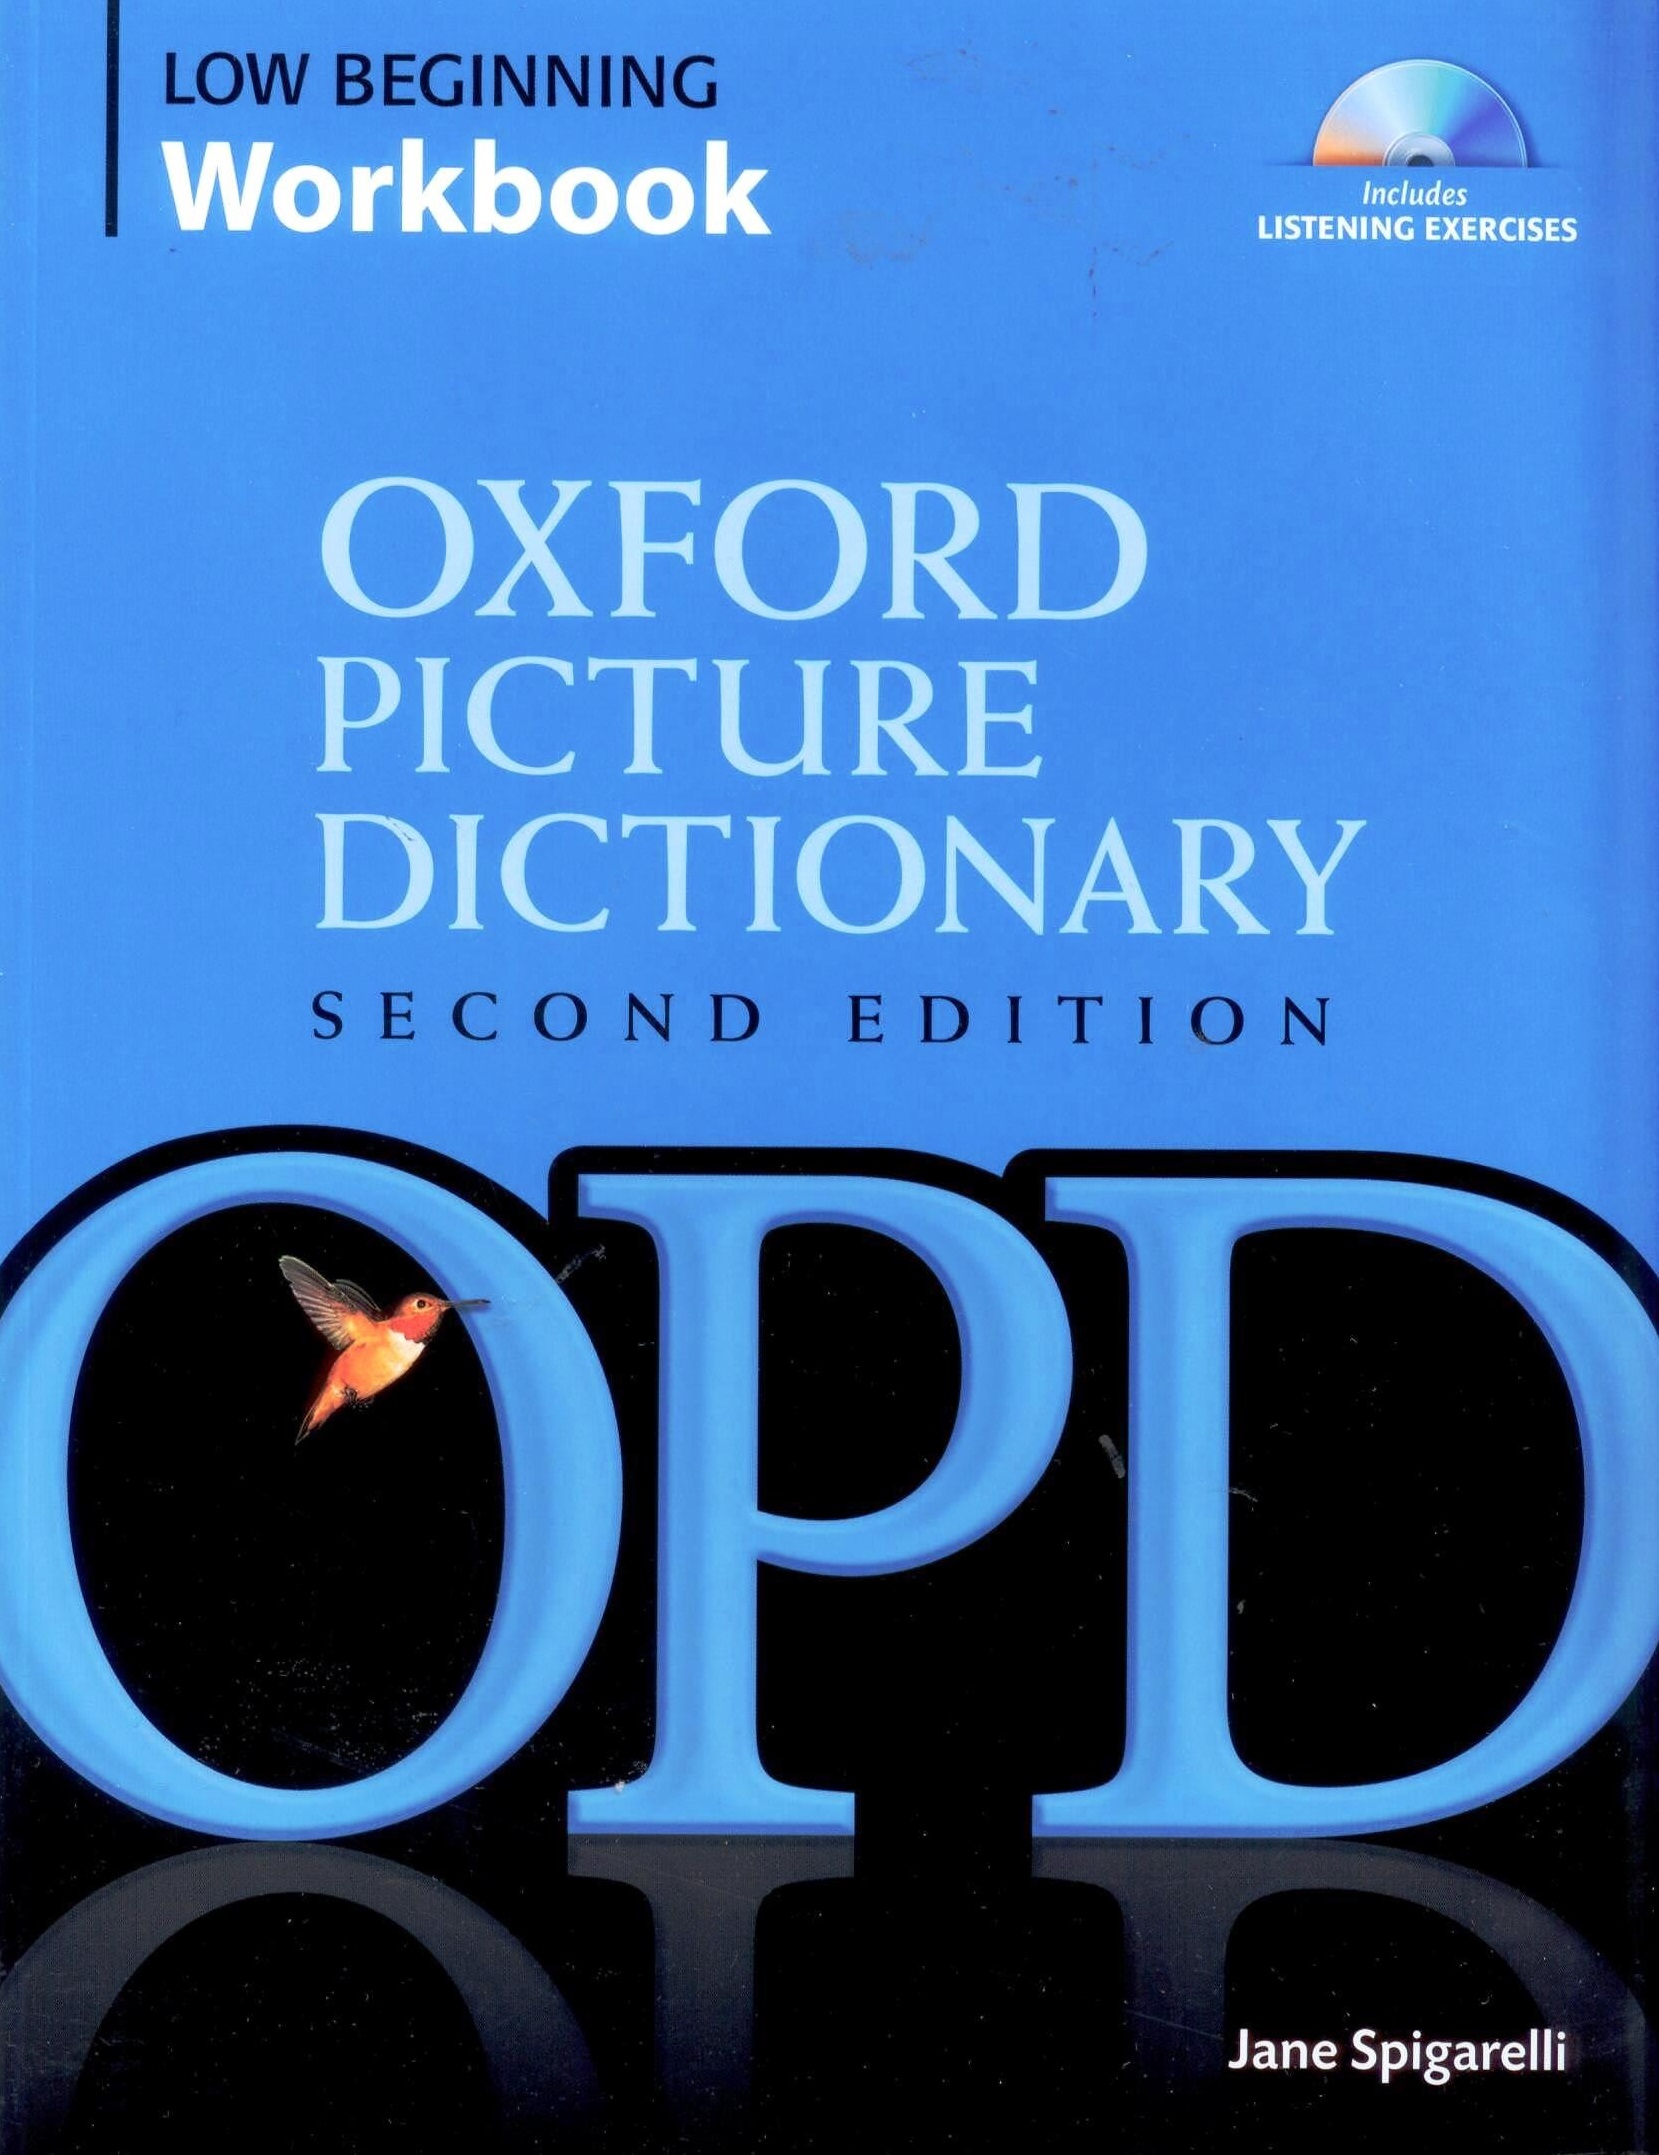 Oxford Picture Dictionary (Second Edition) Low-Beginner Workbook